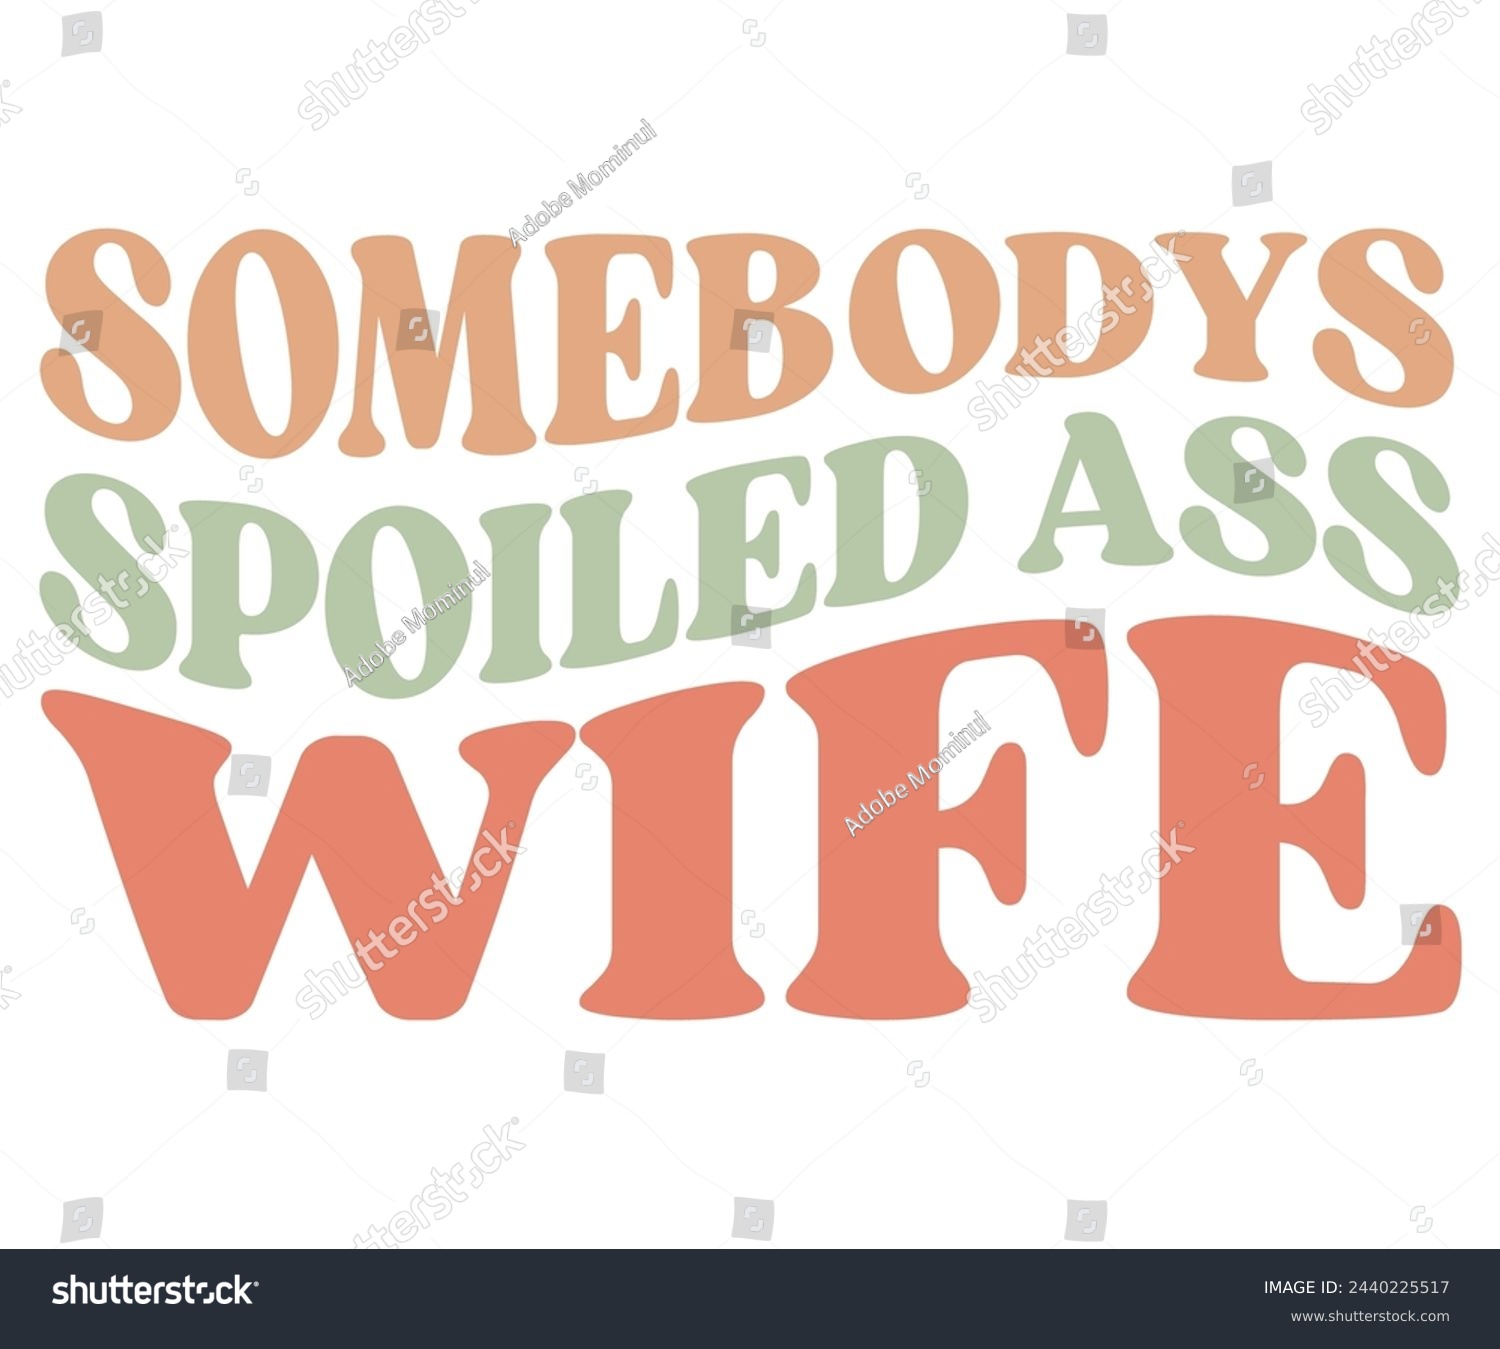 SVG of Somebody's Spoiled Ass Wife,Retro Groovy,Svg,T-shirt,Typography,Svg Cut File,Commercial Use,Instant Download  svg